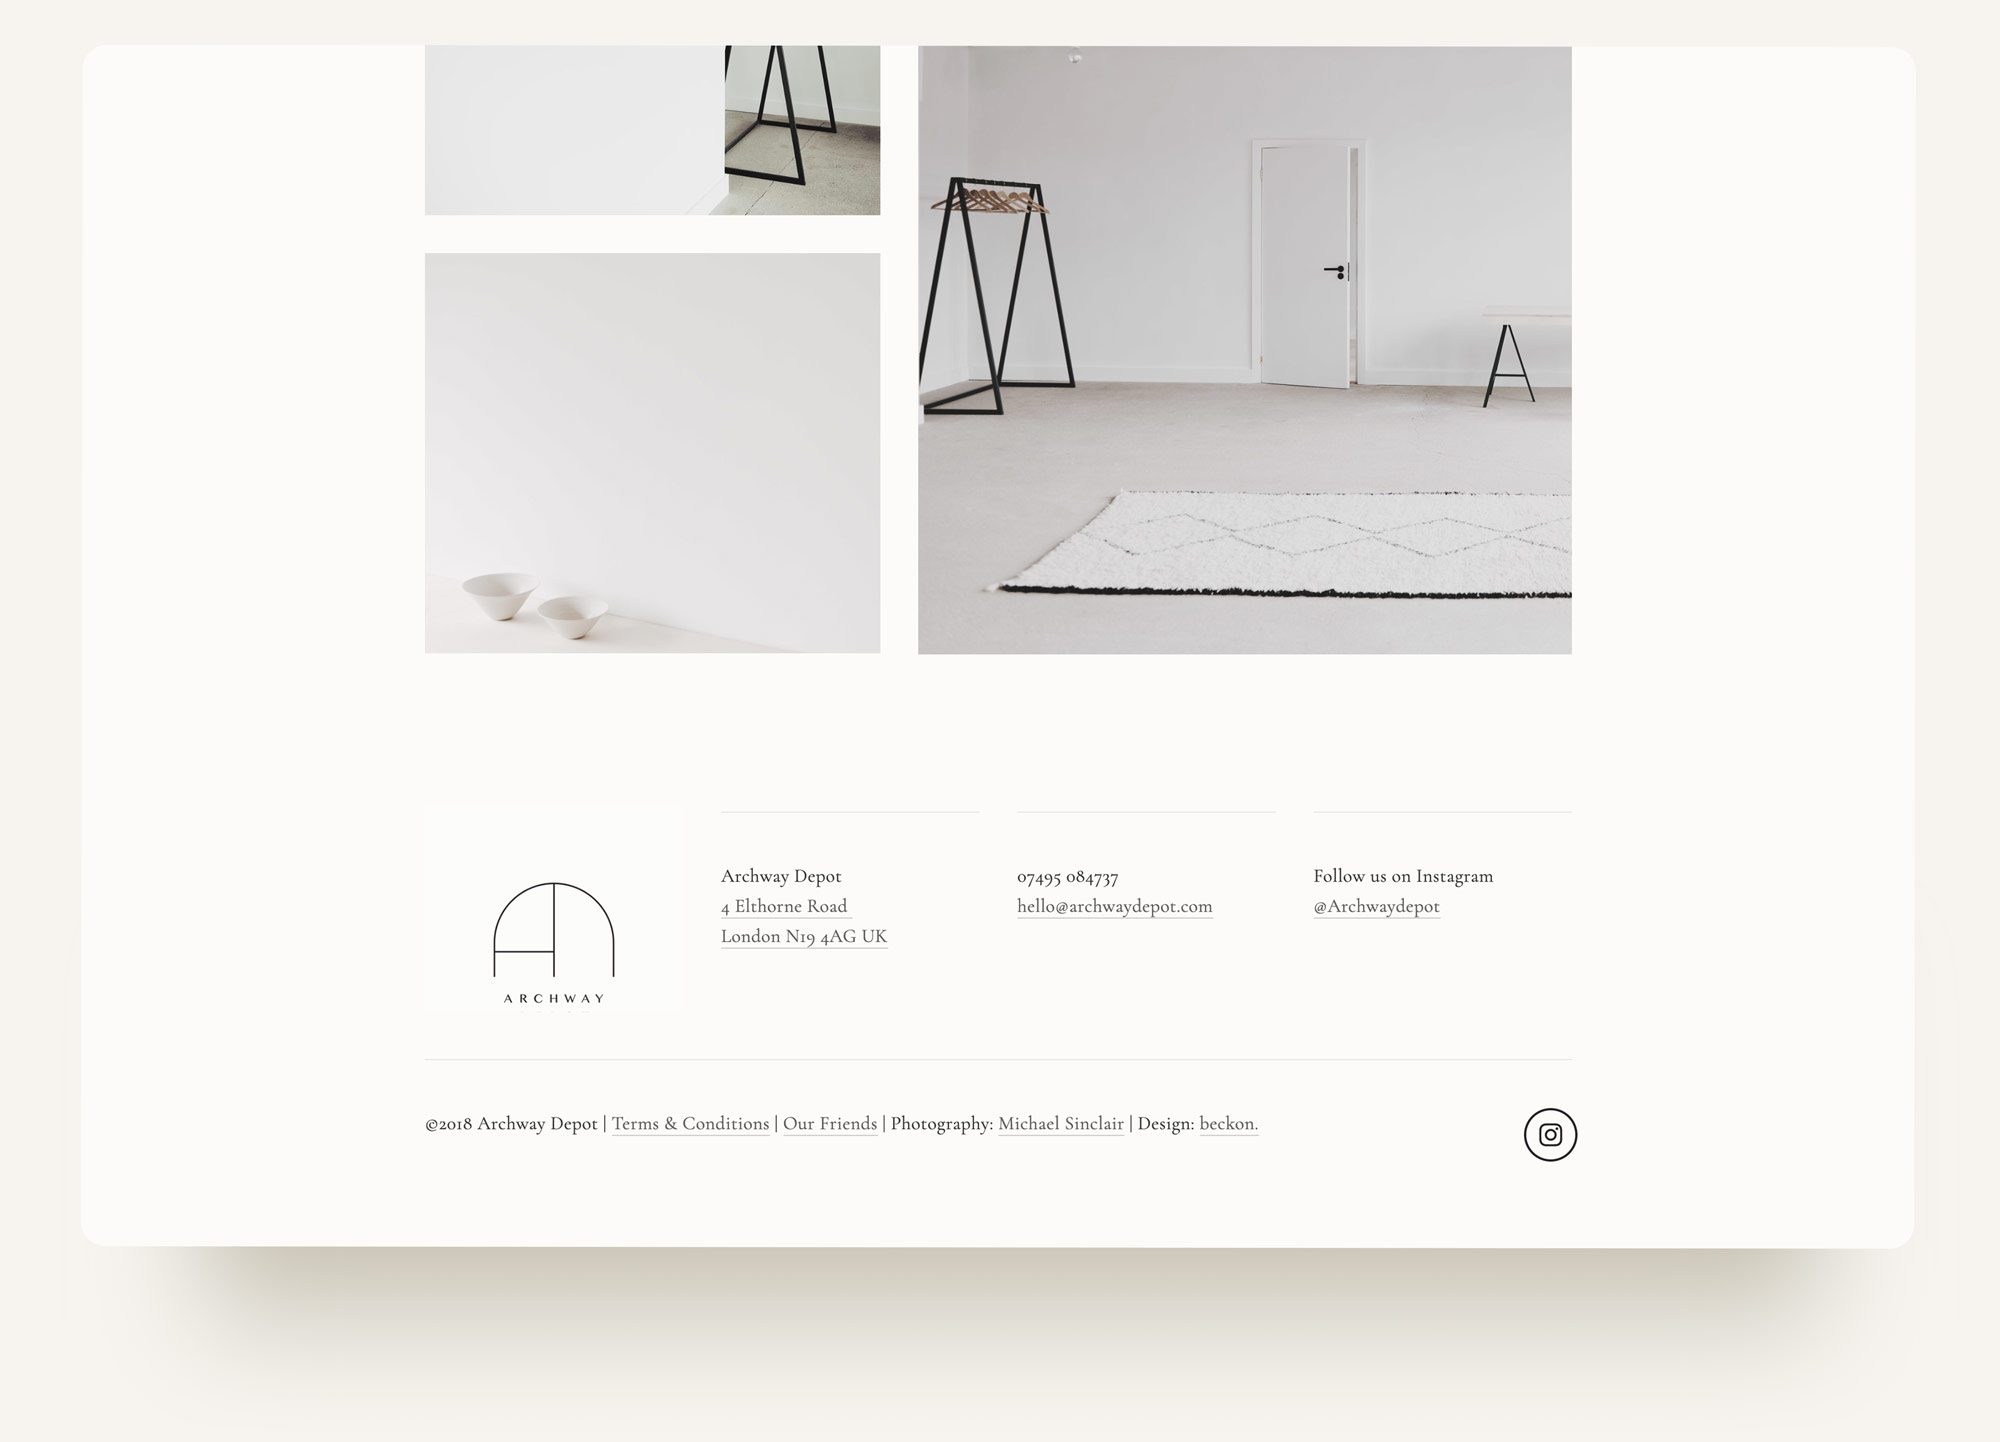 Footer squarespace design for Archway Depot. Web design by Brittany Hurdle beckon webeckon